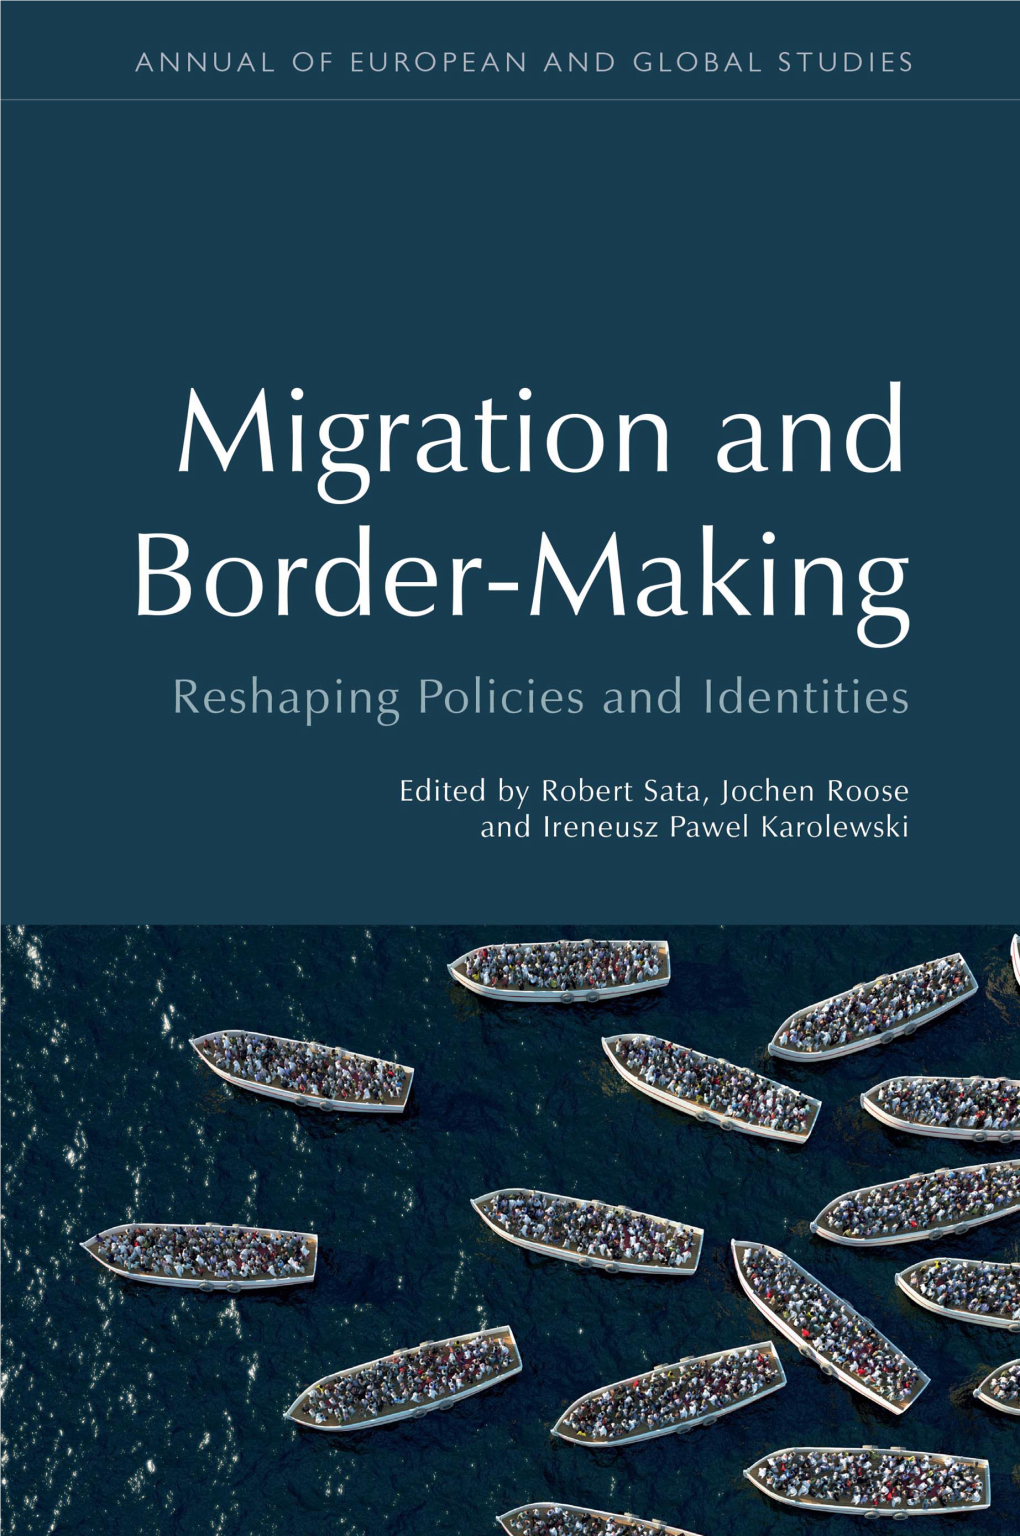 Patterns and Implications of Migration and Rebordering